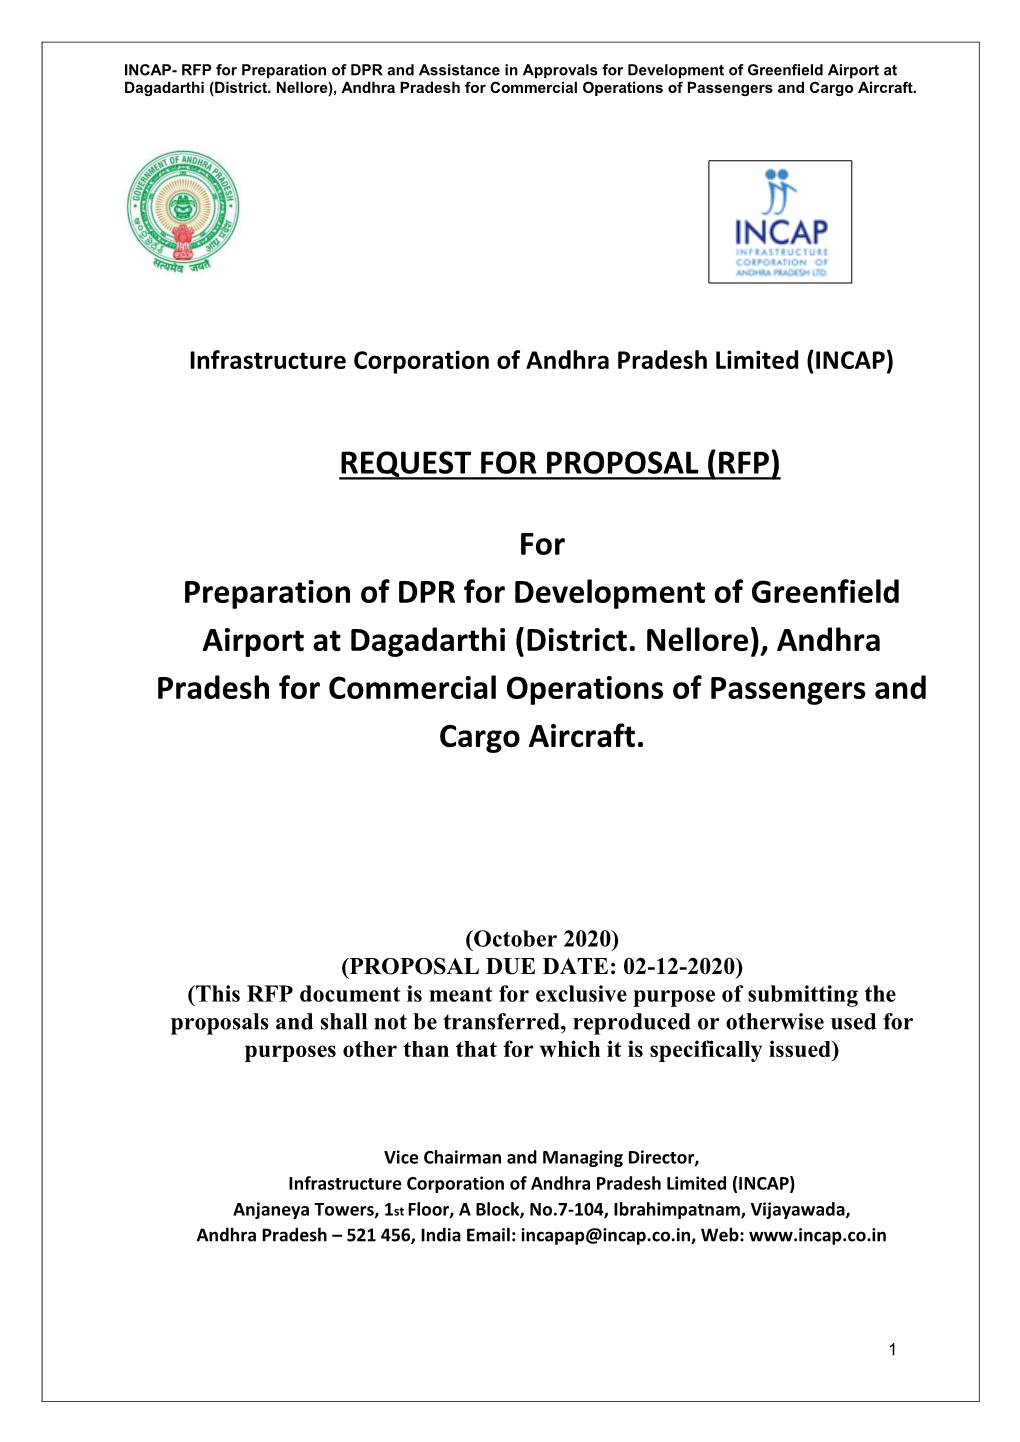 (RFP) for Preparation of DPR for Development of Greenfield Airport